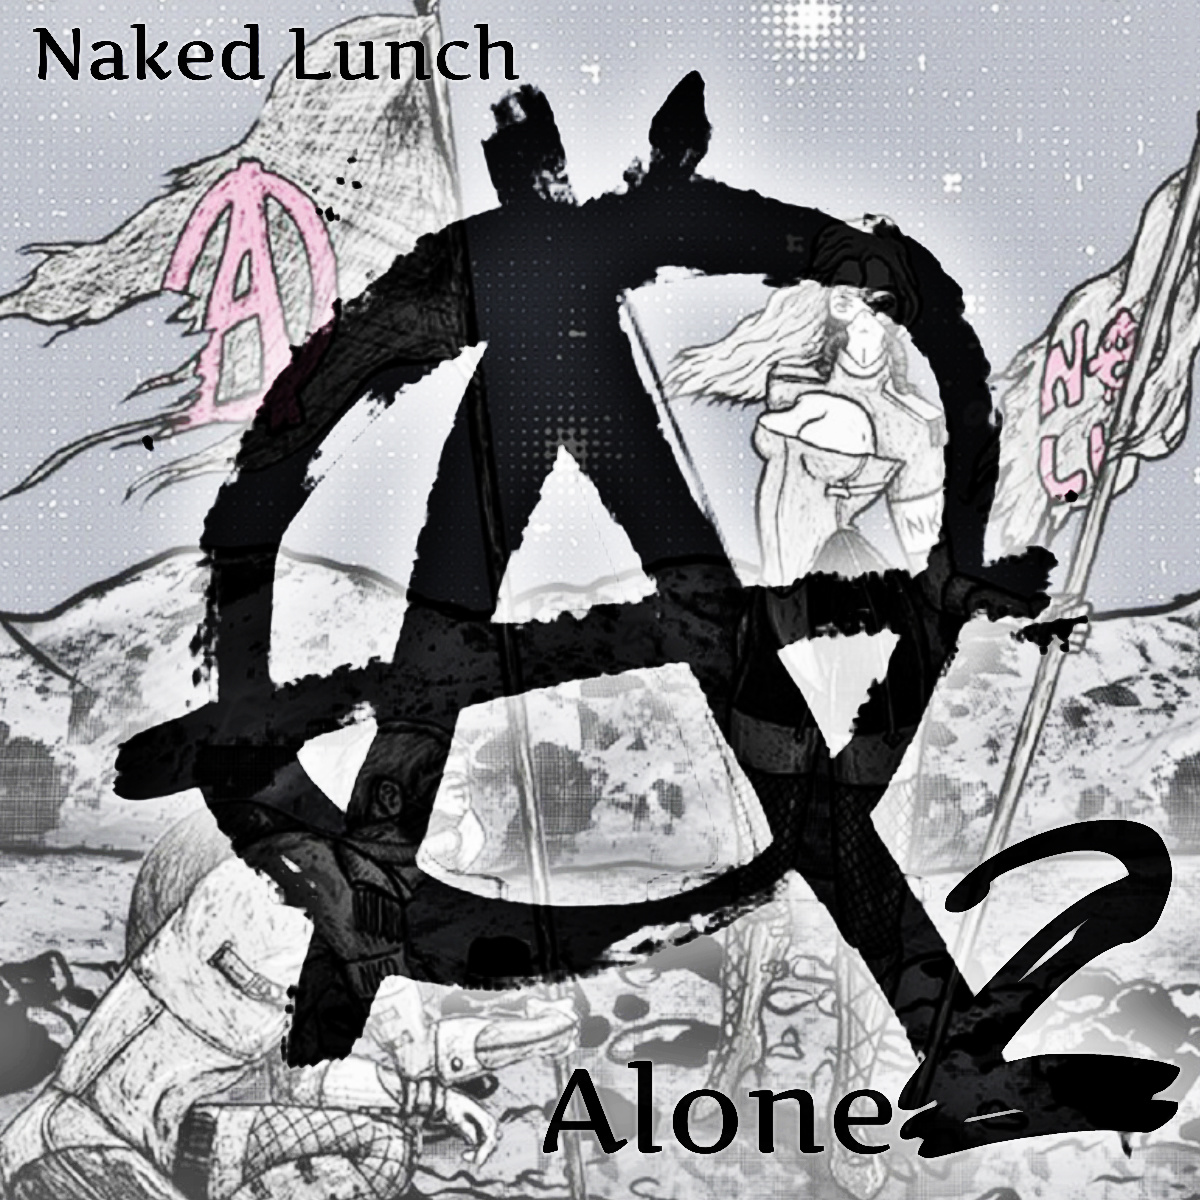 naked lunch - alone 2